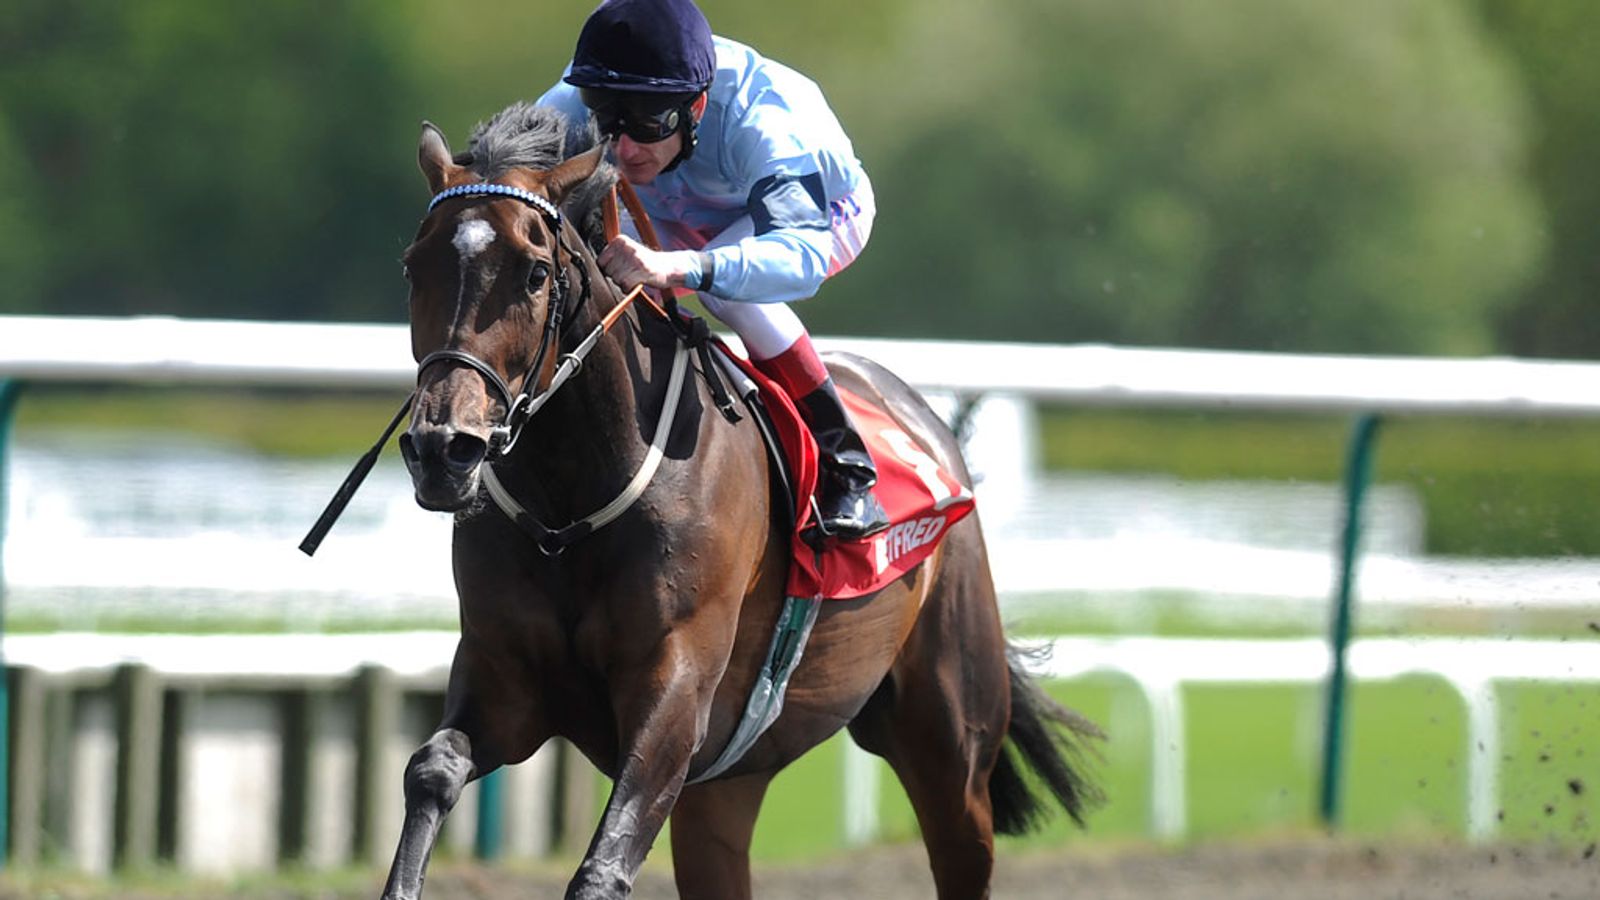 Vow exciting Murtagh | Racing News | Sky Sports